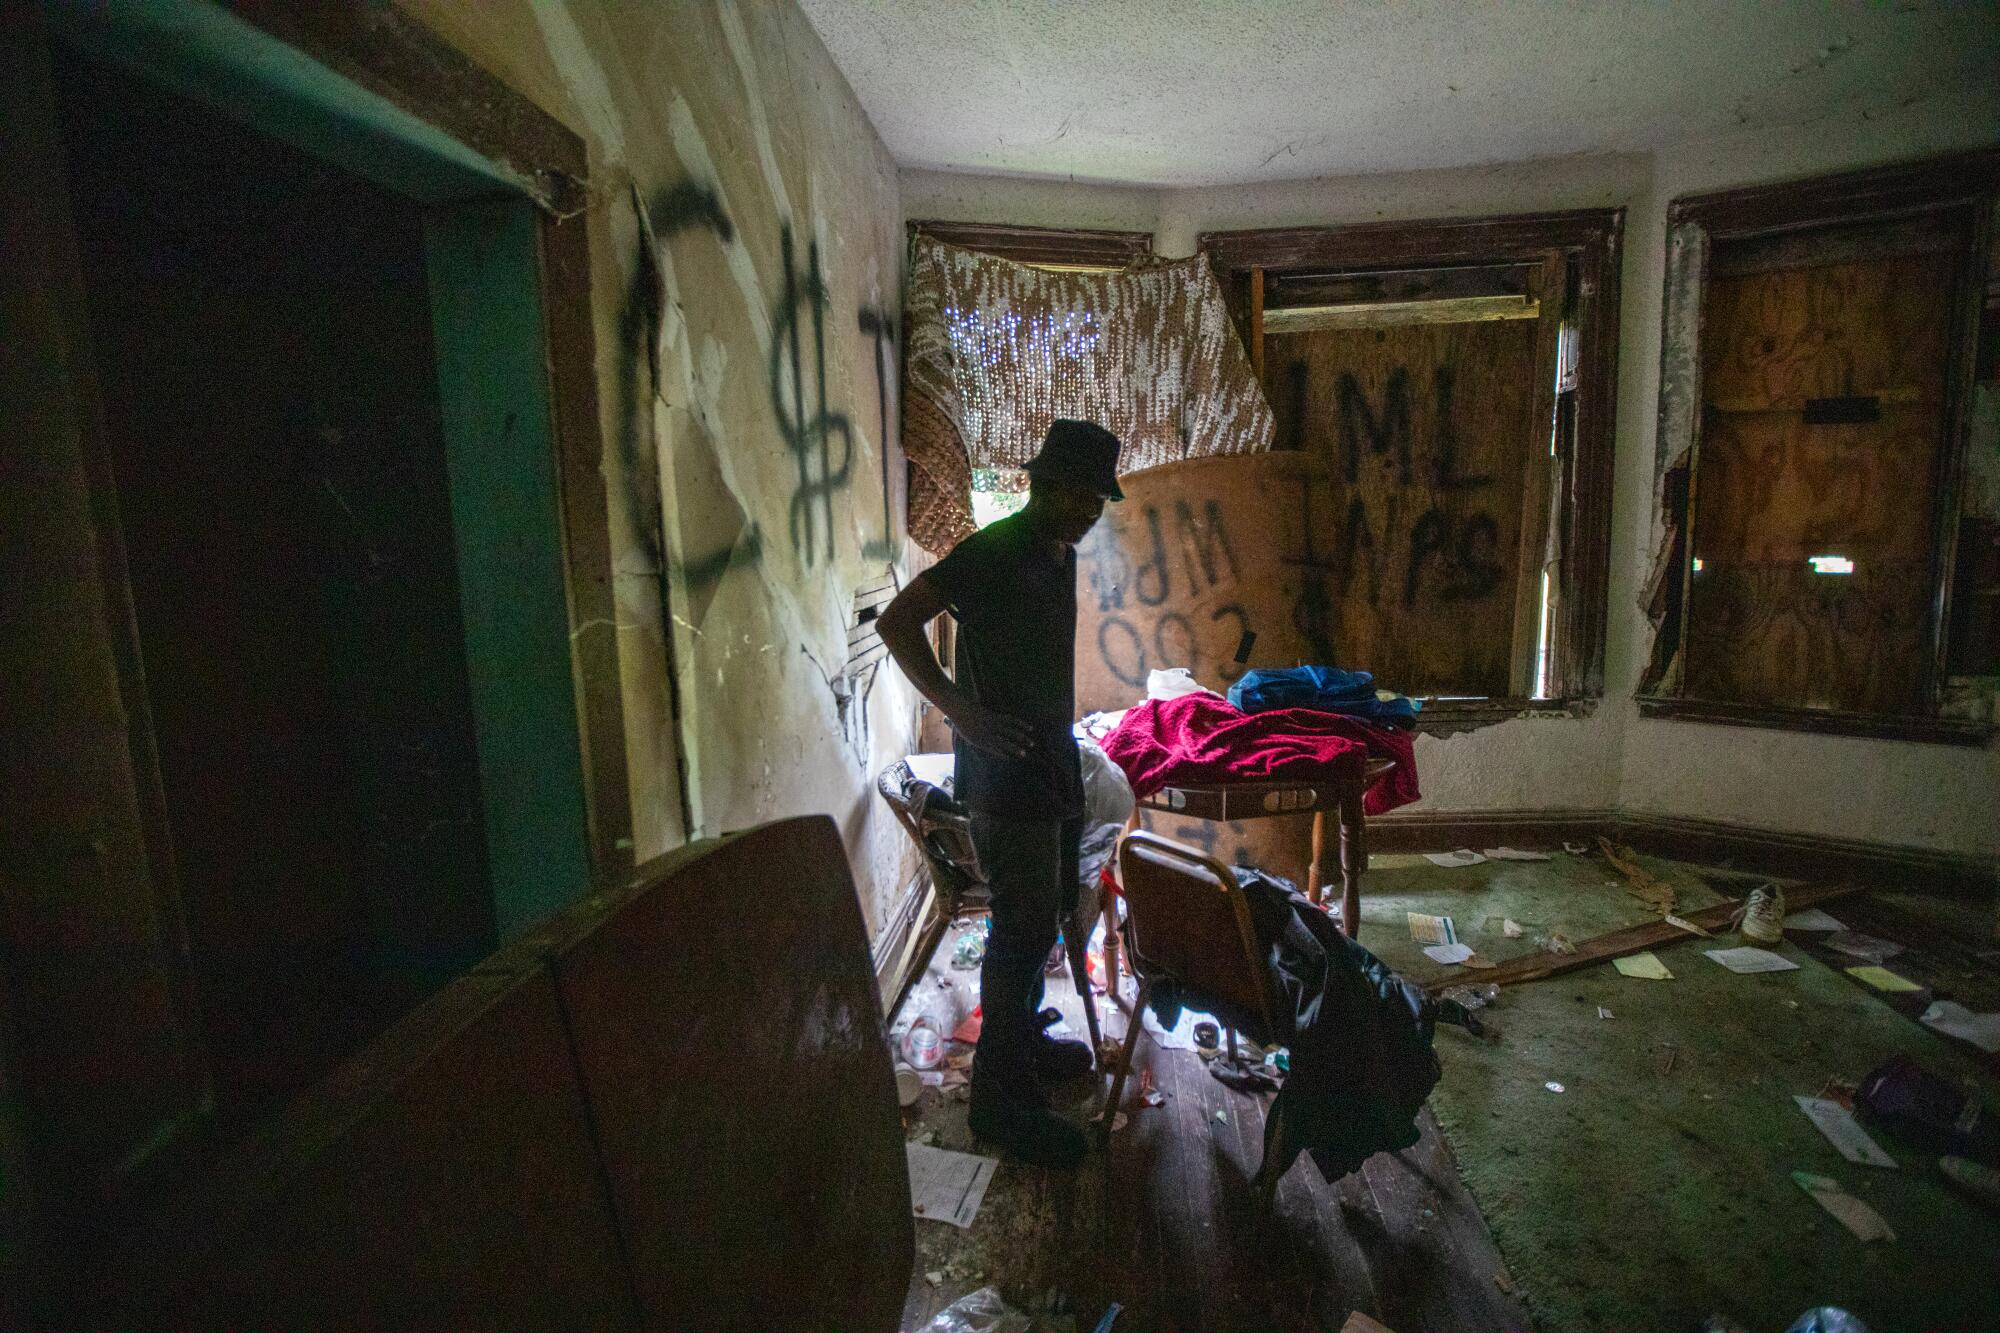 Jimmie Mac Lee stands in a room with boarded up windows, graffiti and debris.